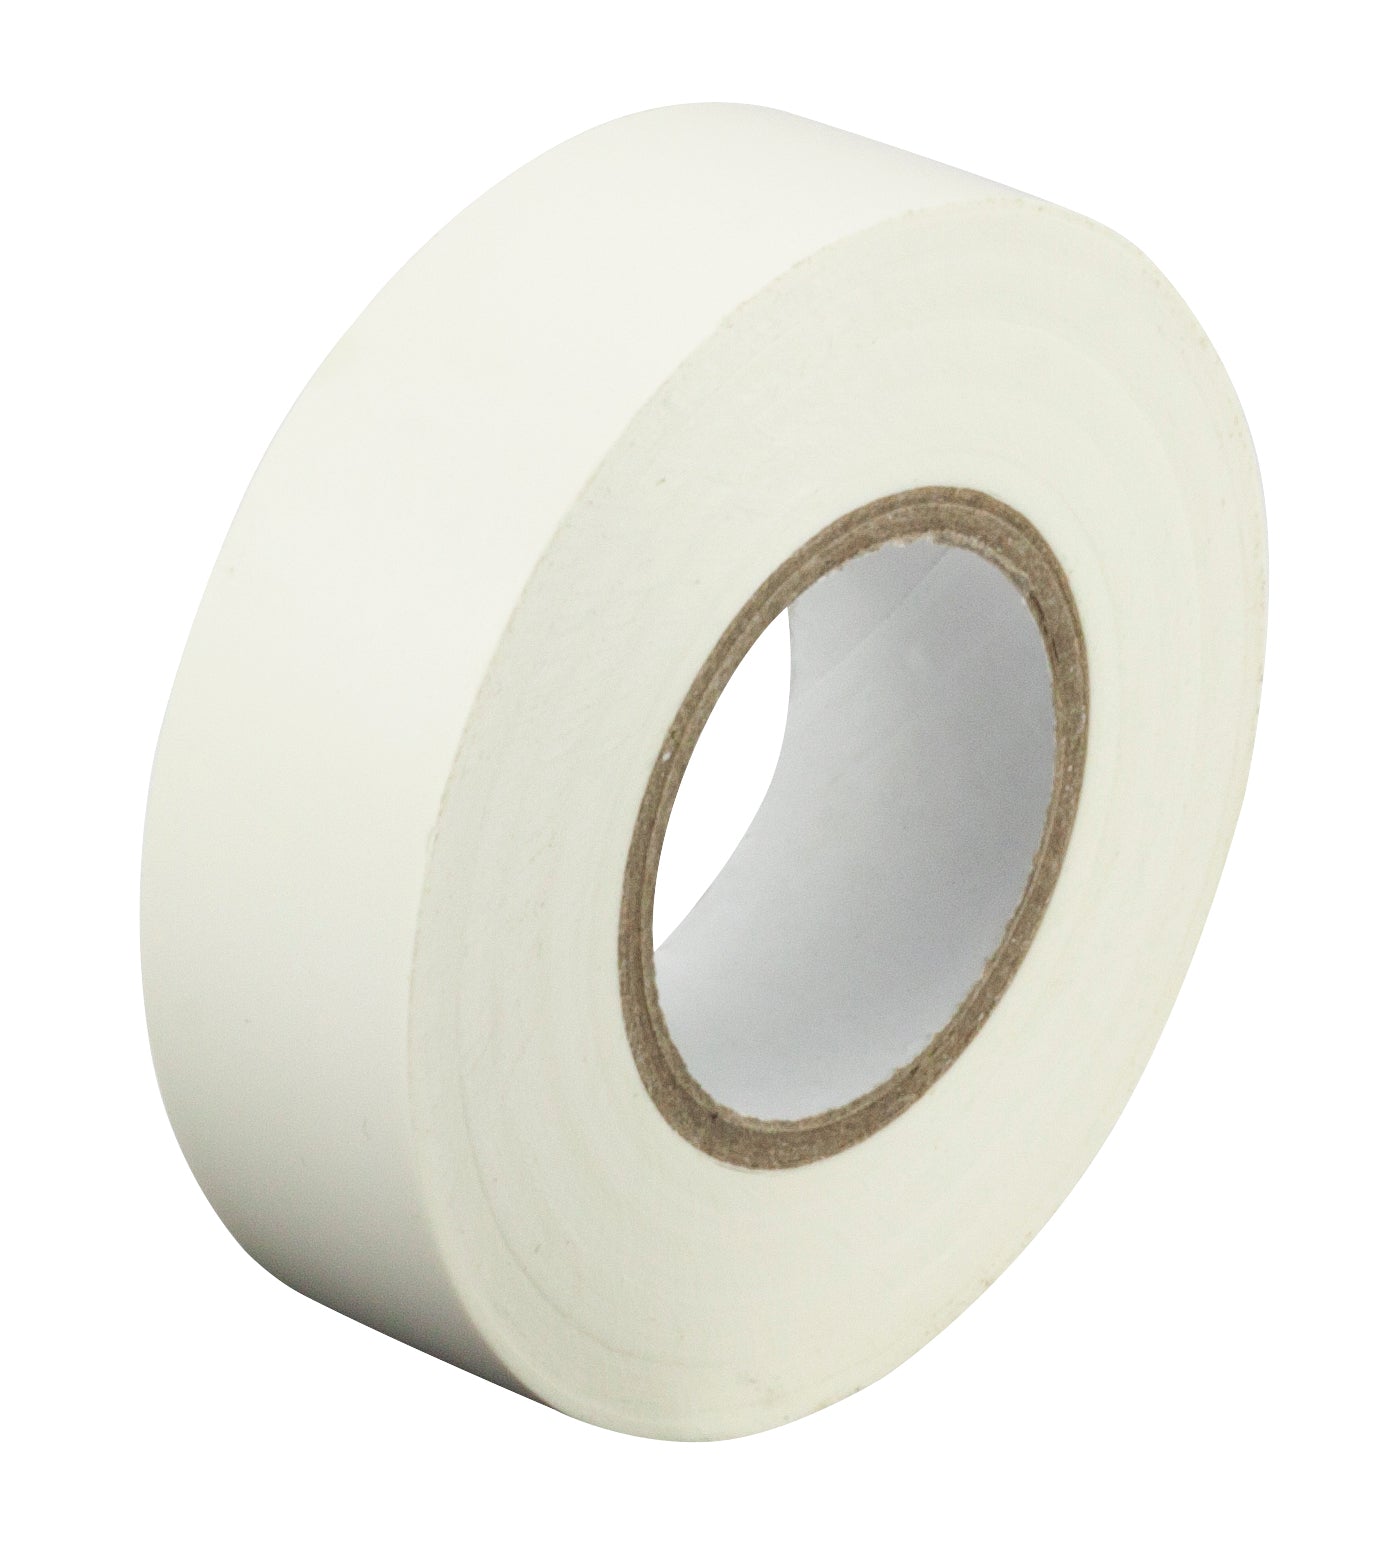 PVC Tape Size: 19mmx20m Roll - White - Pack of 10